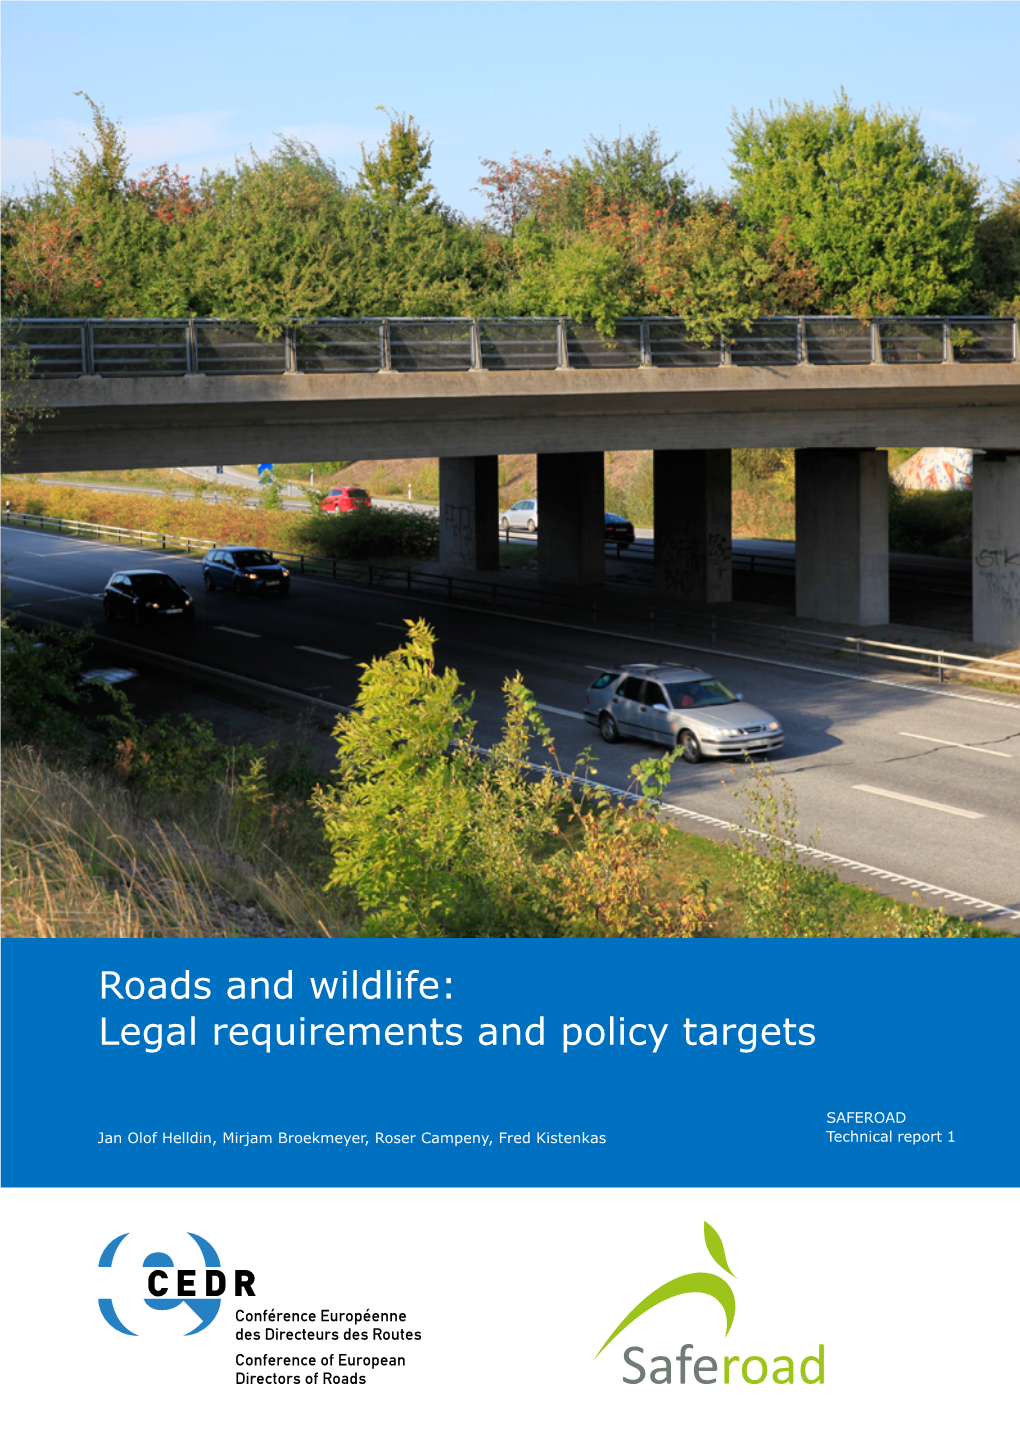 Roads and Wildlife: Legal Requirements and Policy Targets